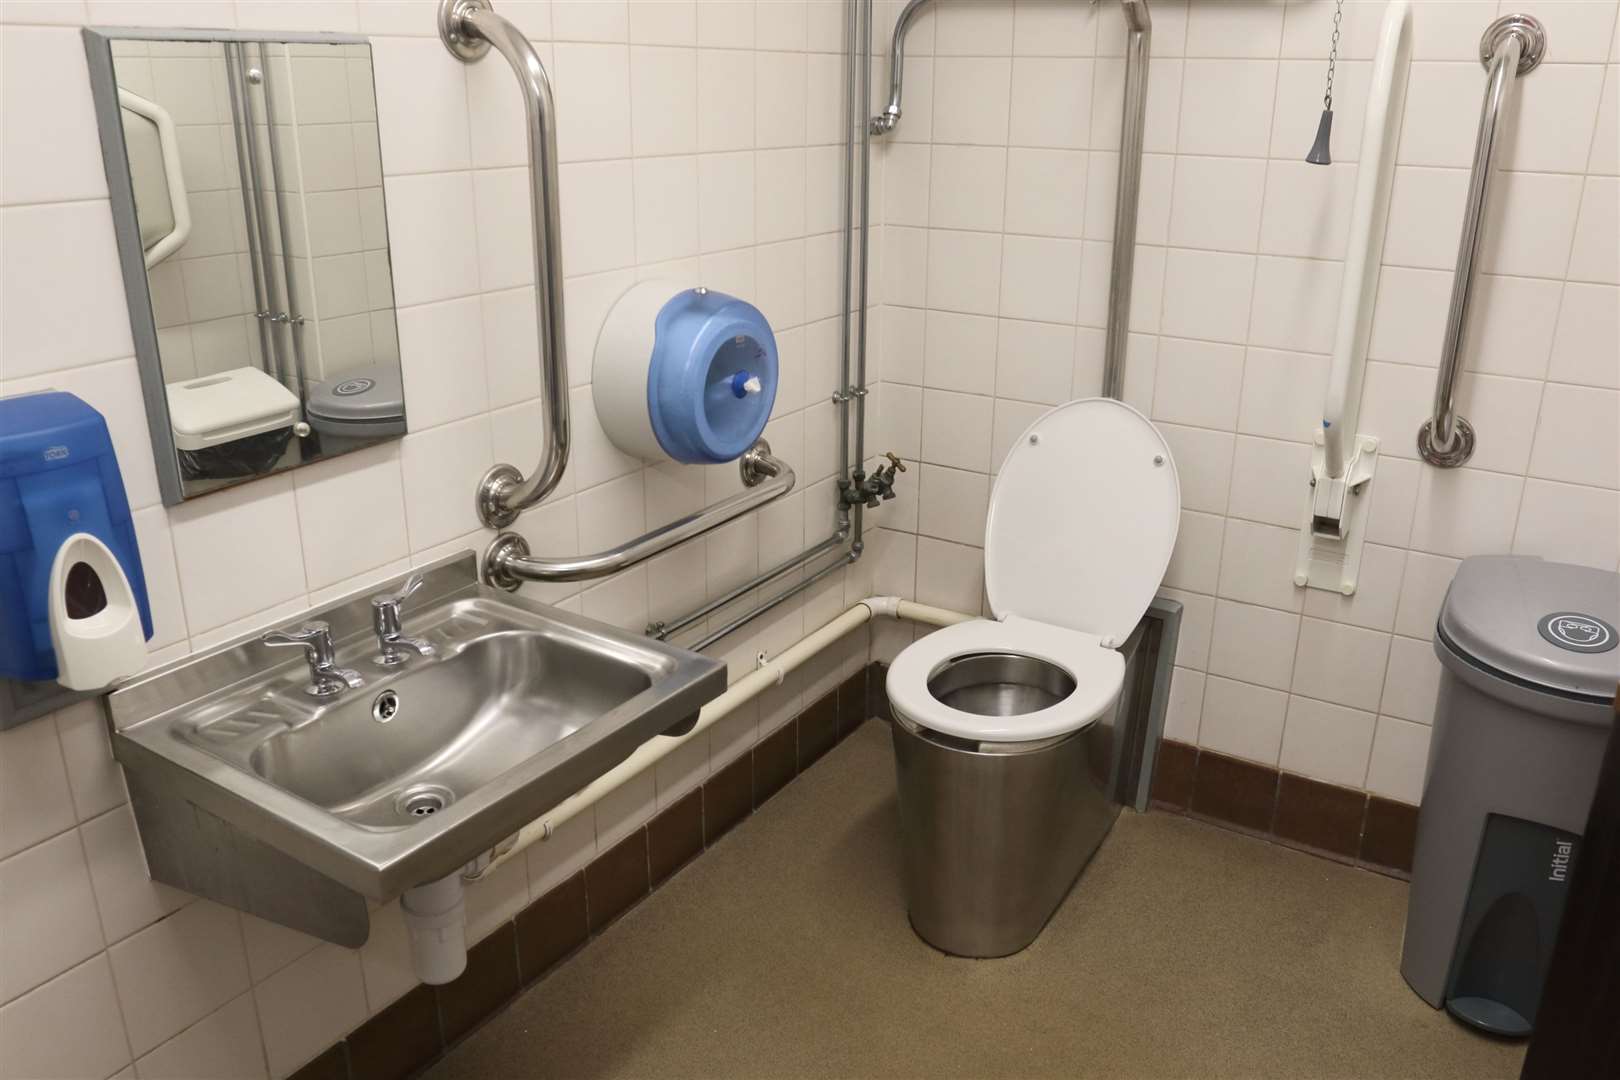 Work has been carried out to upgrade and refurbish the toilets.